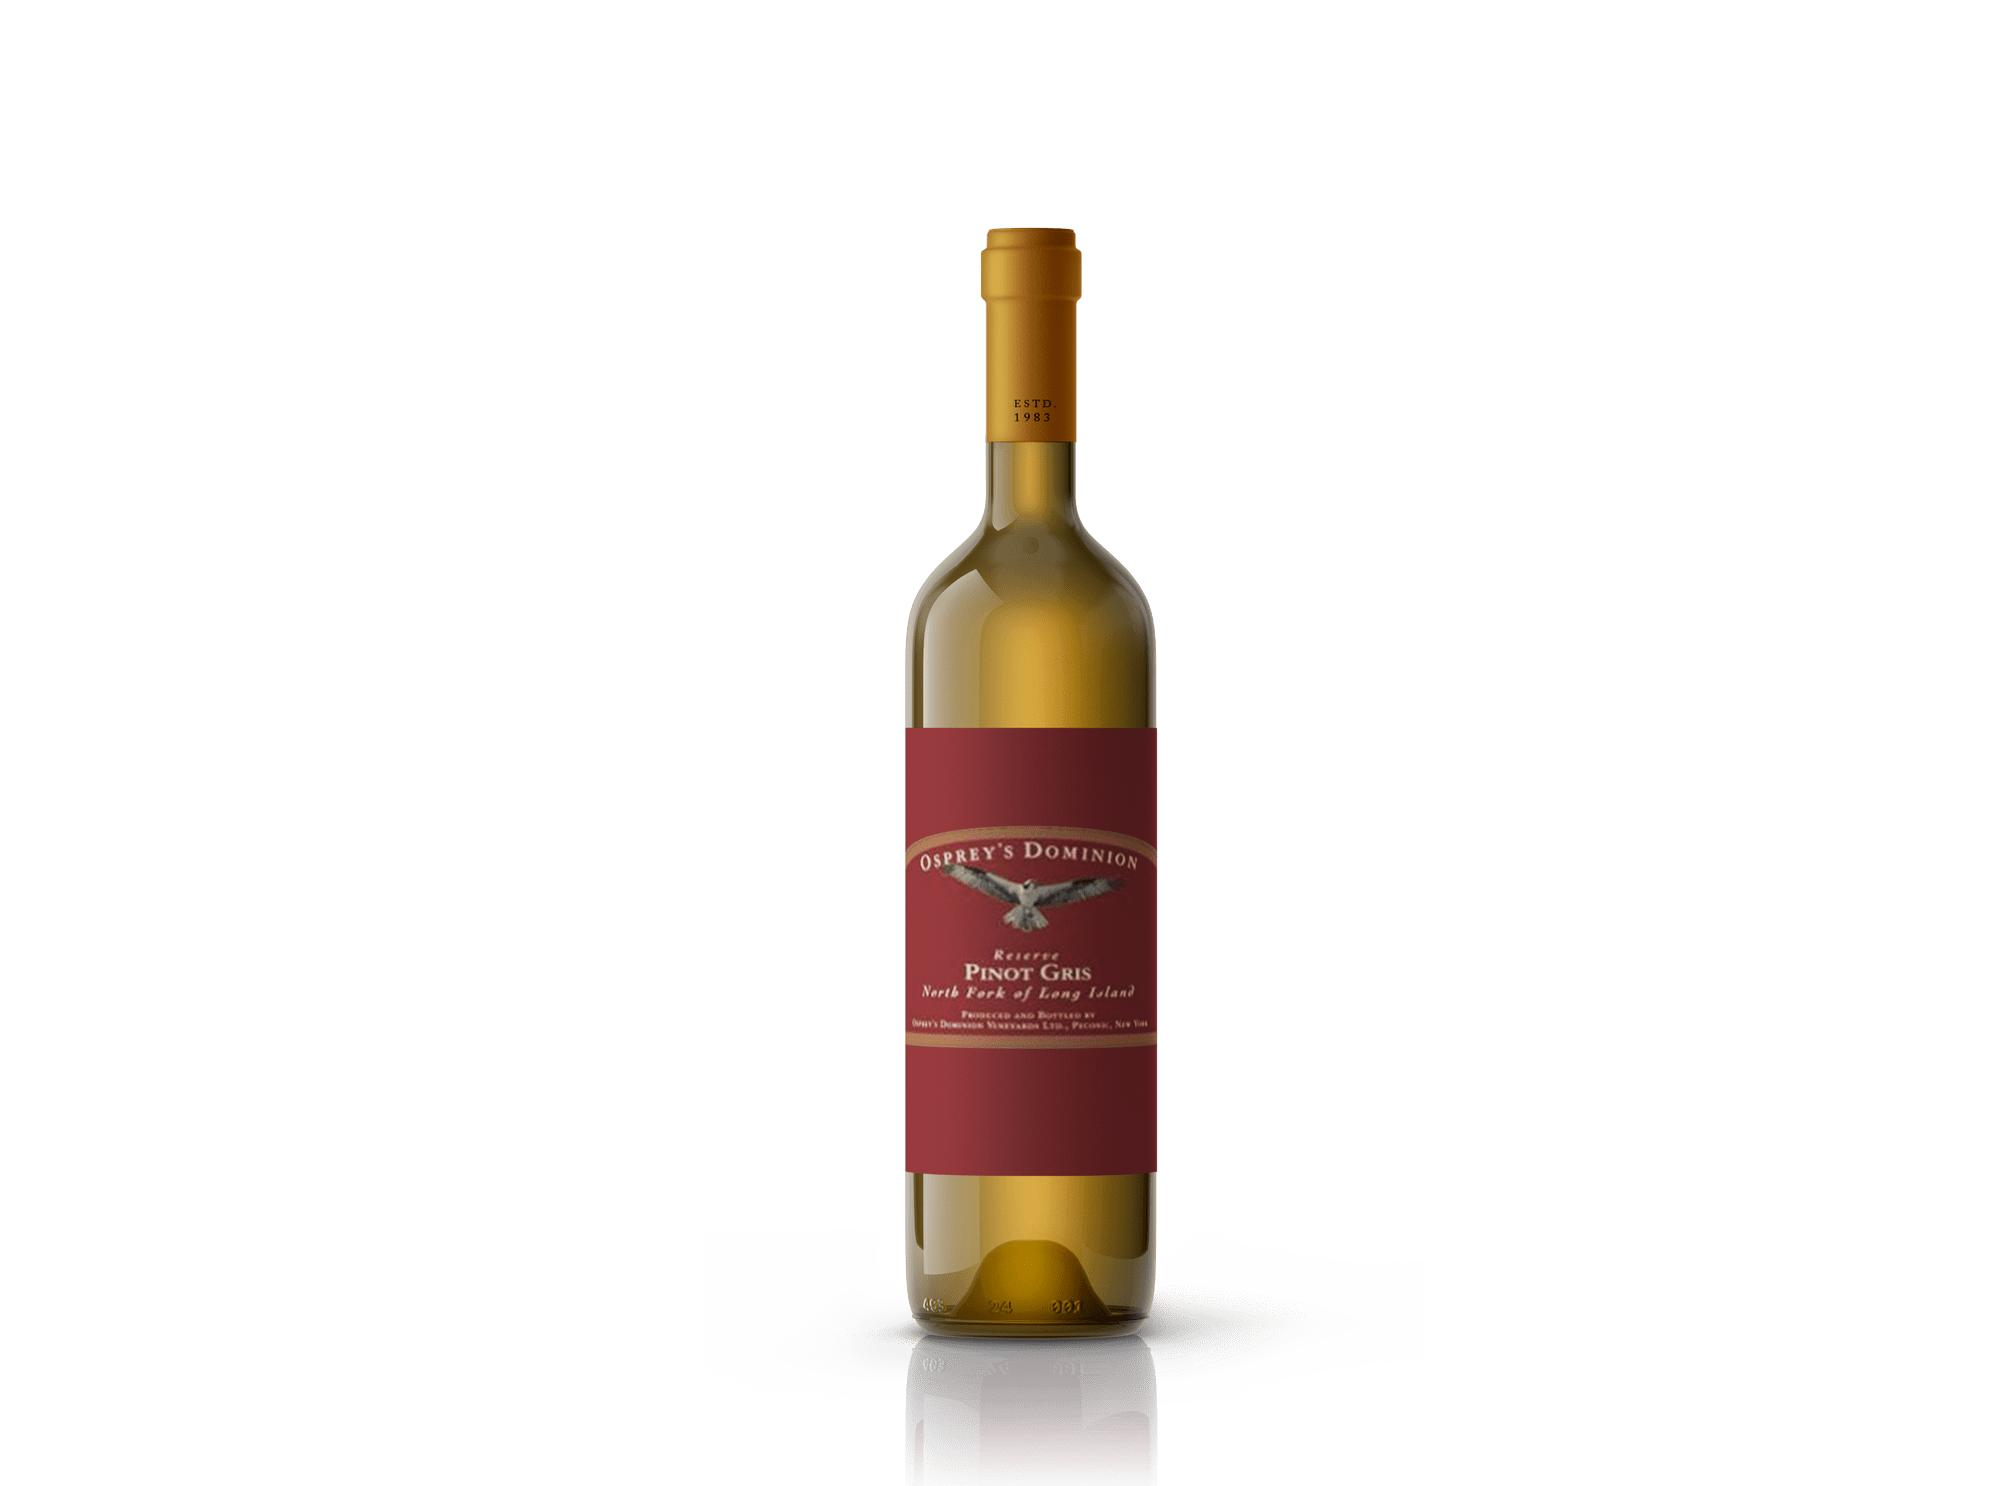 Reserve Pinot Gris wine